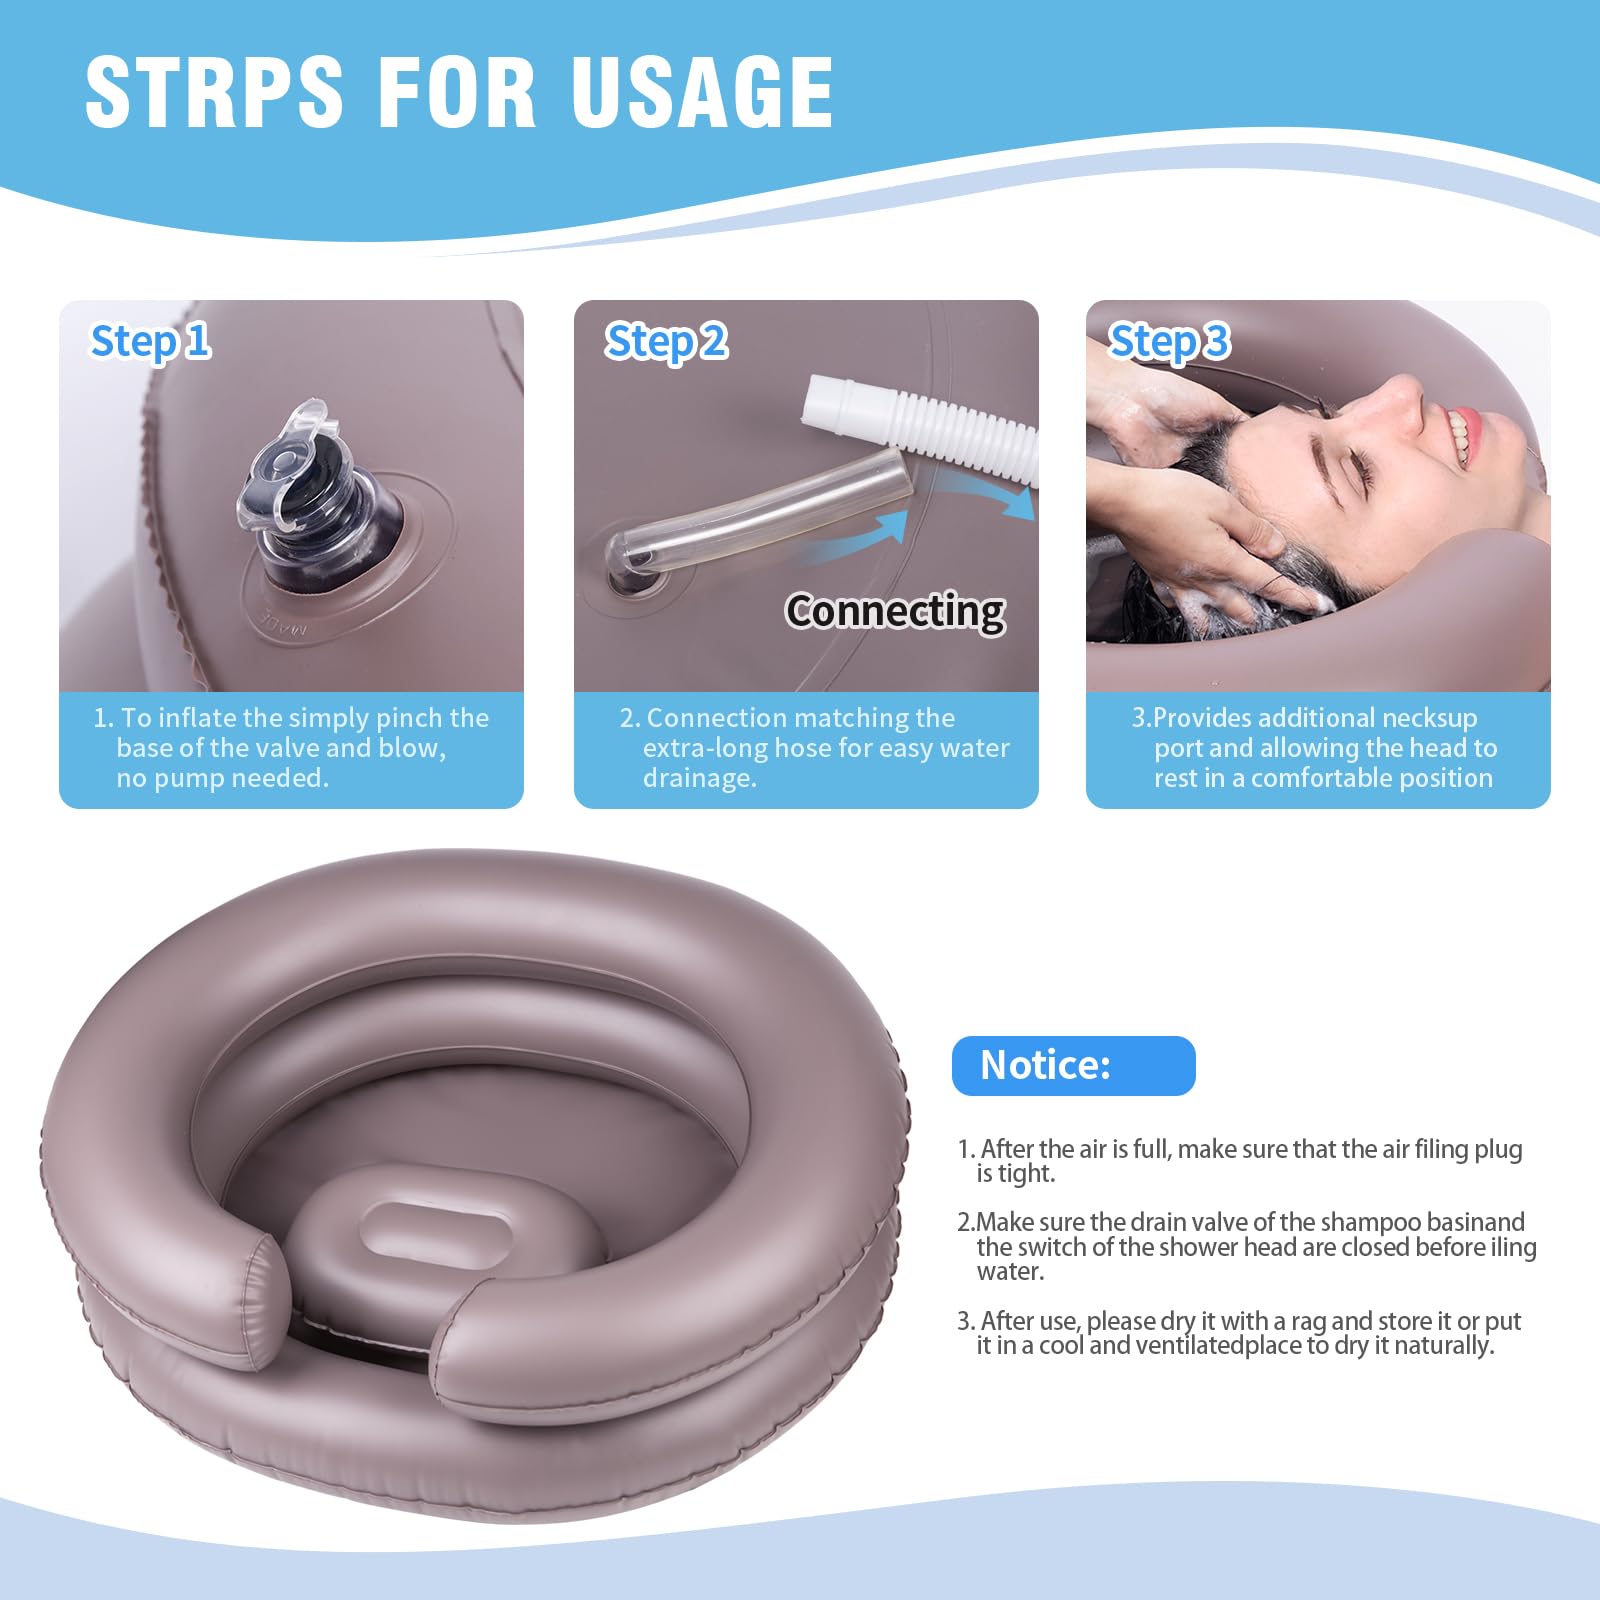 LOKFEHRE Portable Inflatable Hair Washing Basin for Bedridden - Wash Hair in Bed with Inflatable Shampoo Bowl.Hair Washing Basin for Elderly,Disabled,Injured,Ideal Inflatable Sink for Locs Detox.